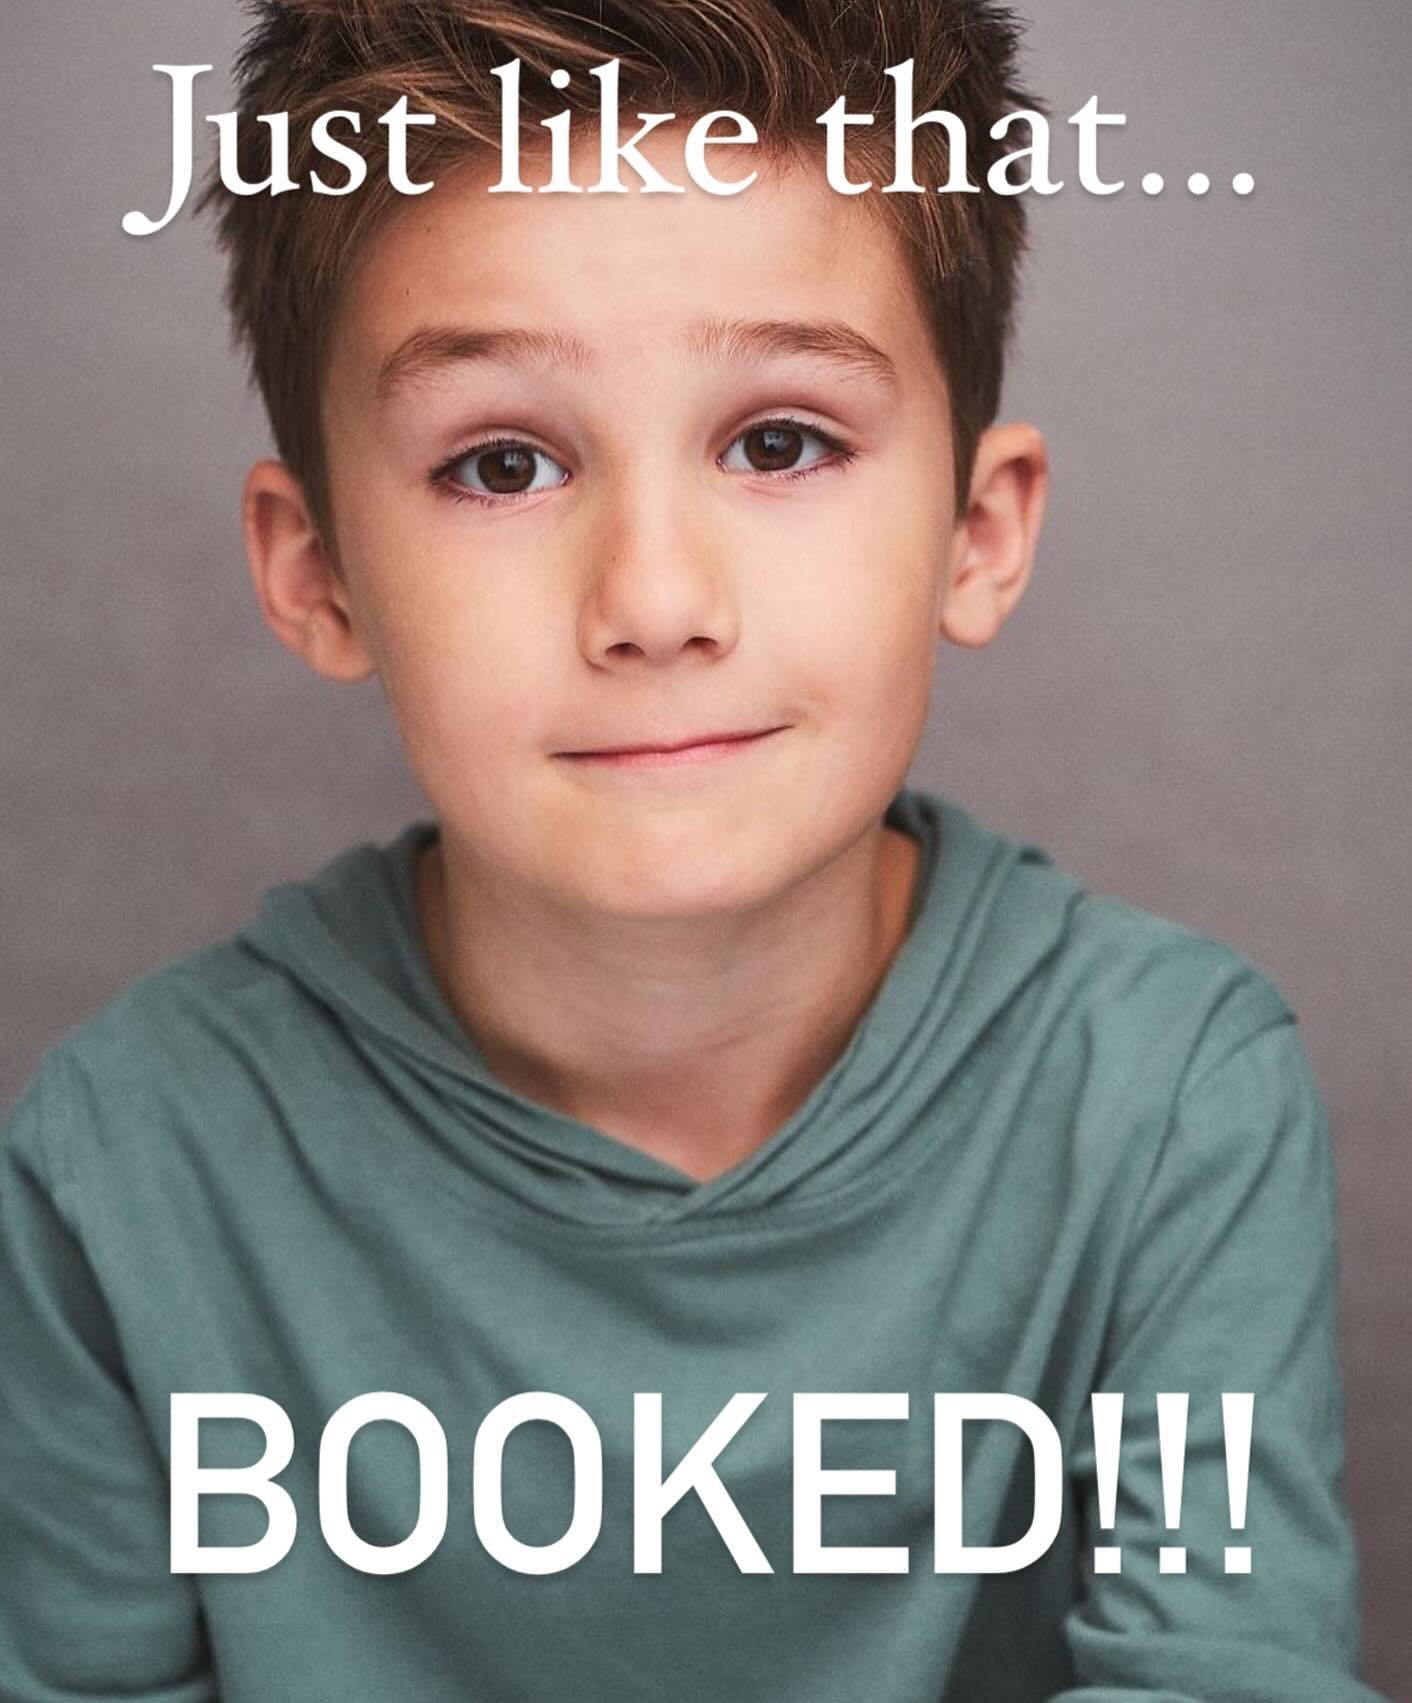 VO booking for our dude, @lynden_miles! Let's keep spreading that dust. Always a proud coach!

#bookedbookers #bookedfamily #bookedbymichelle #coachmichelle